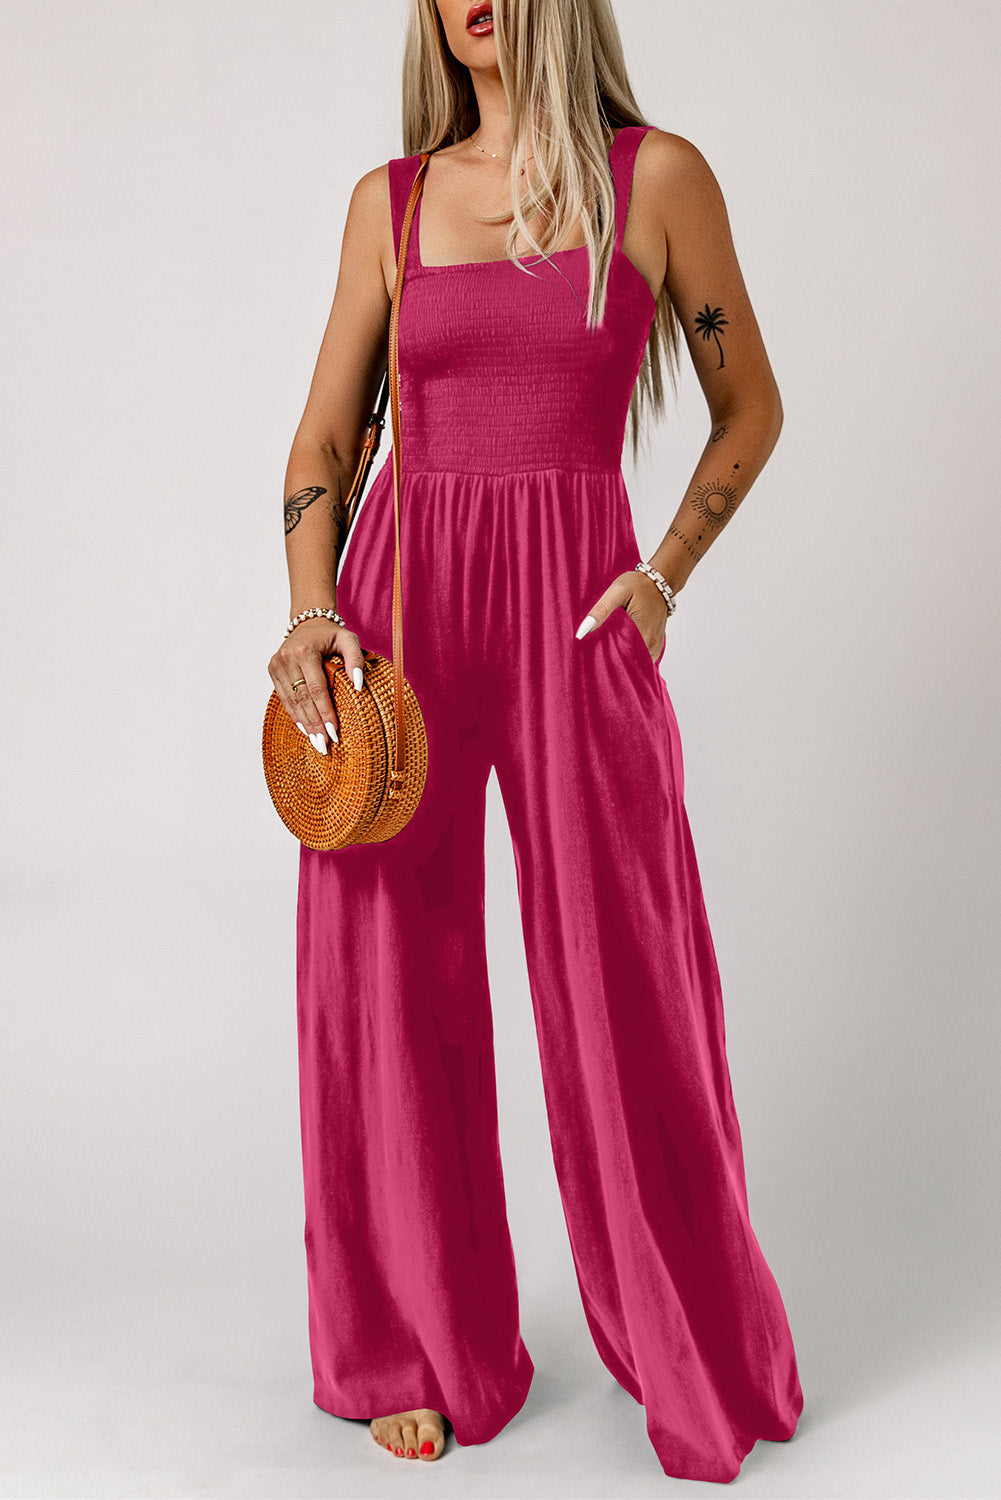 Smocked Square Neck Wide Leg Jumpsuit with Pockets Sunset and Swim Deep Rose S 